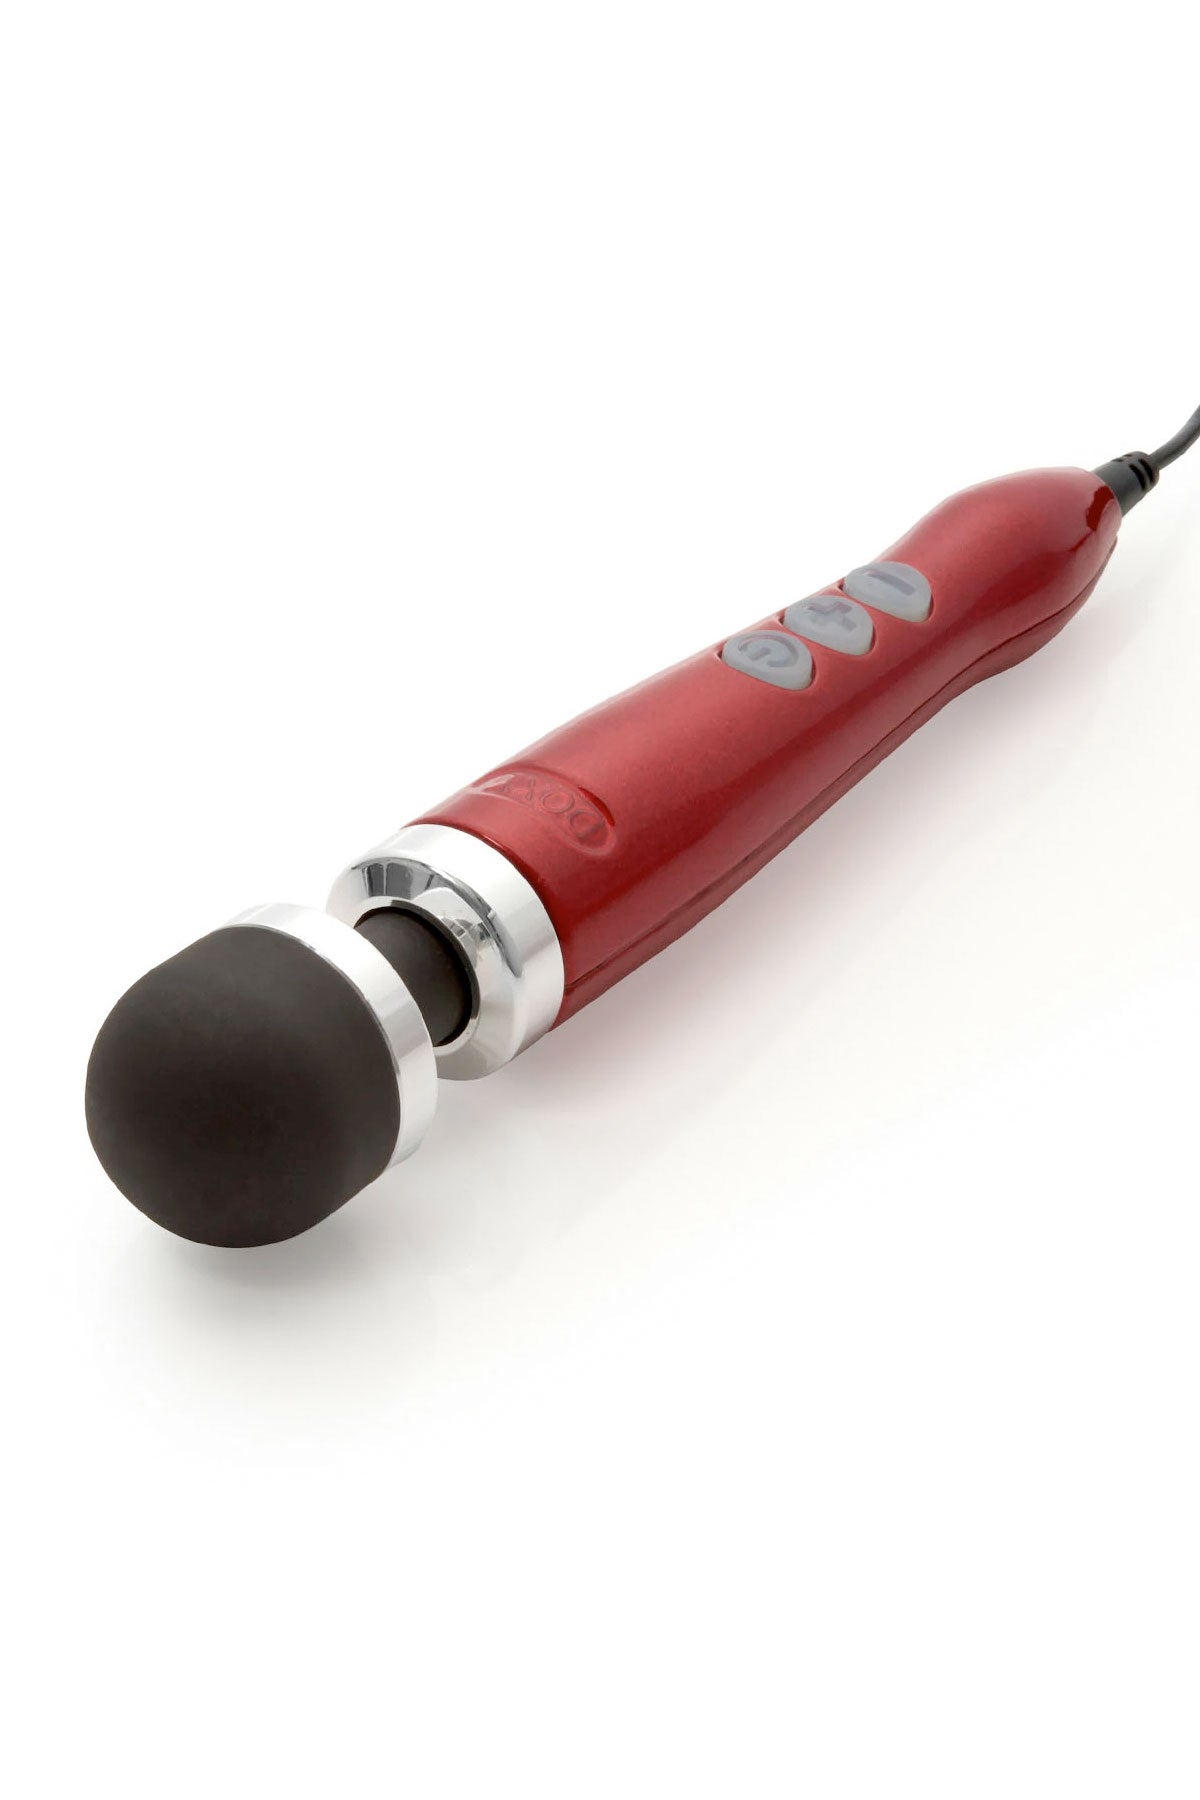 DOXY Number 3 Red Massage Wand 